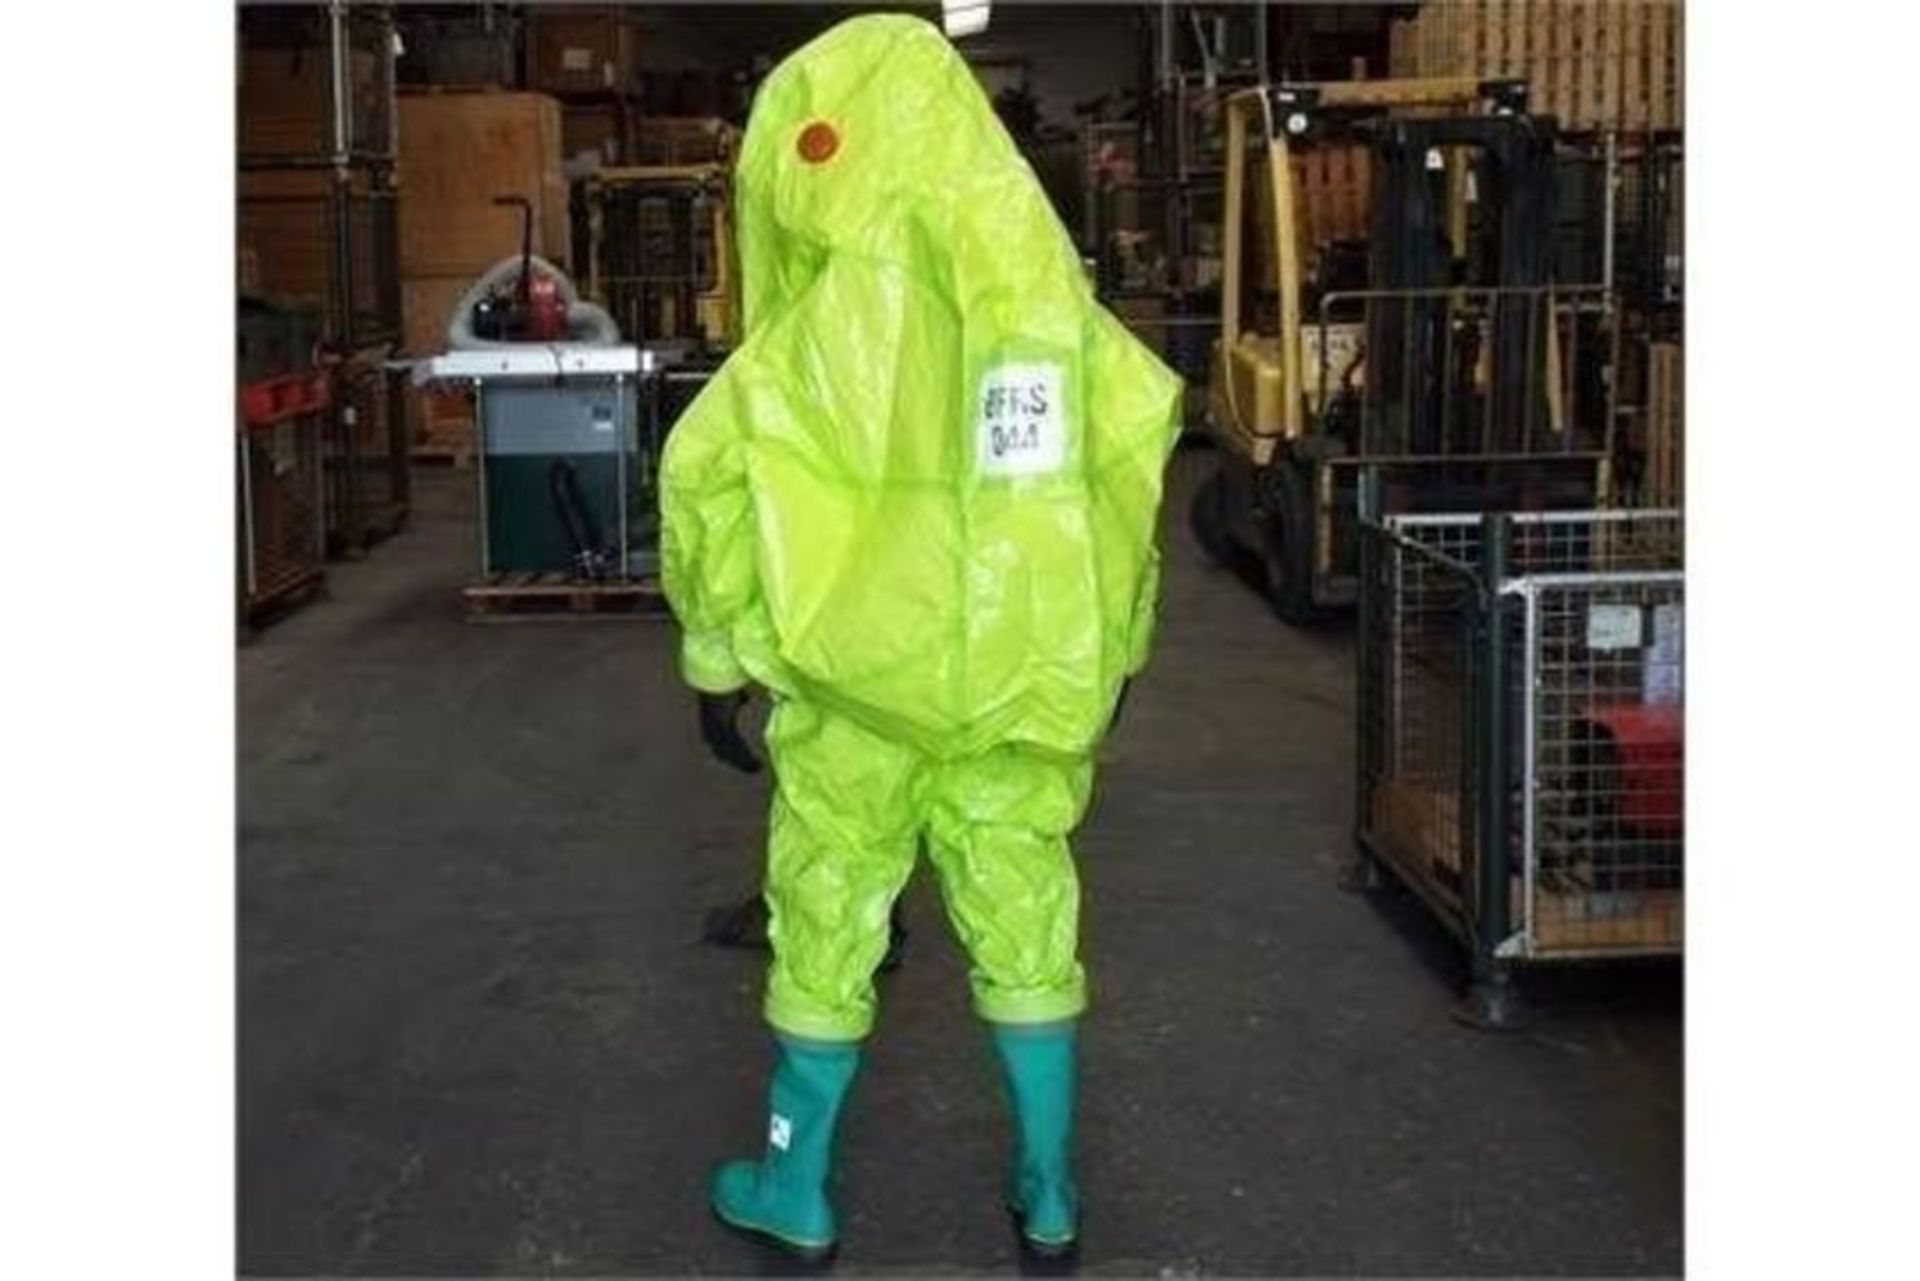 10 x Respirex Tychem TK Gas-Tight Hazmat Suit Type 1A with Attached Boots and Gloves - Image 4 of 10